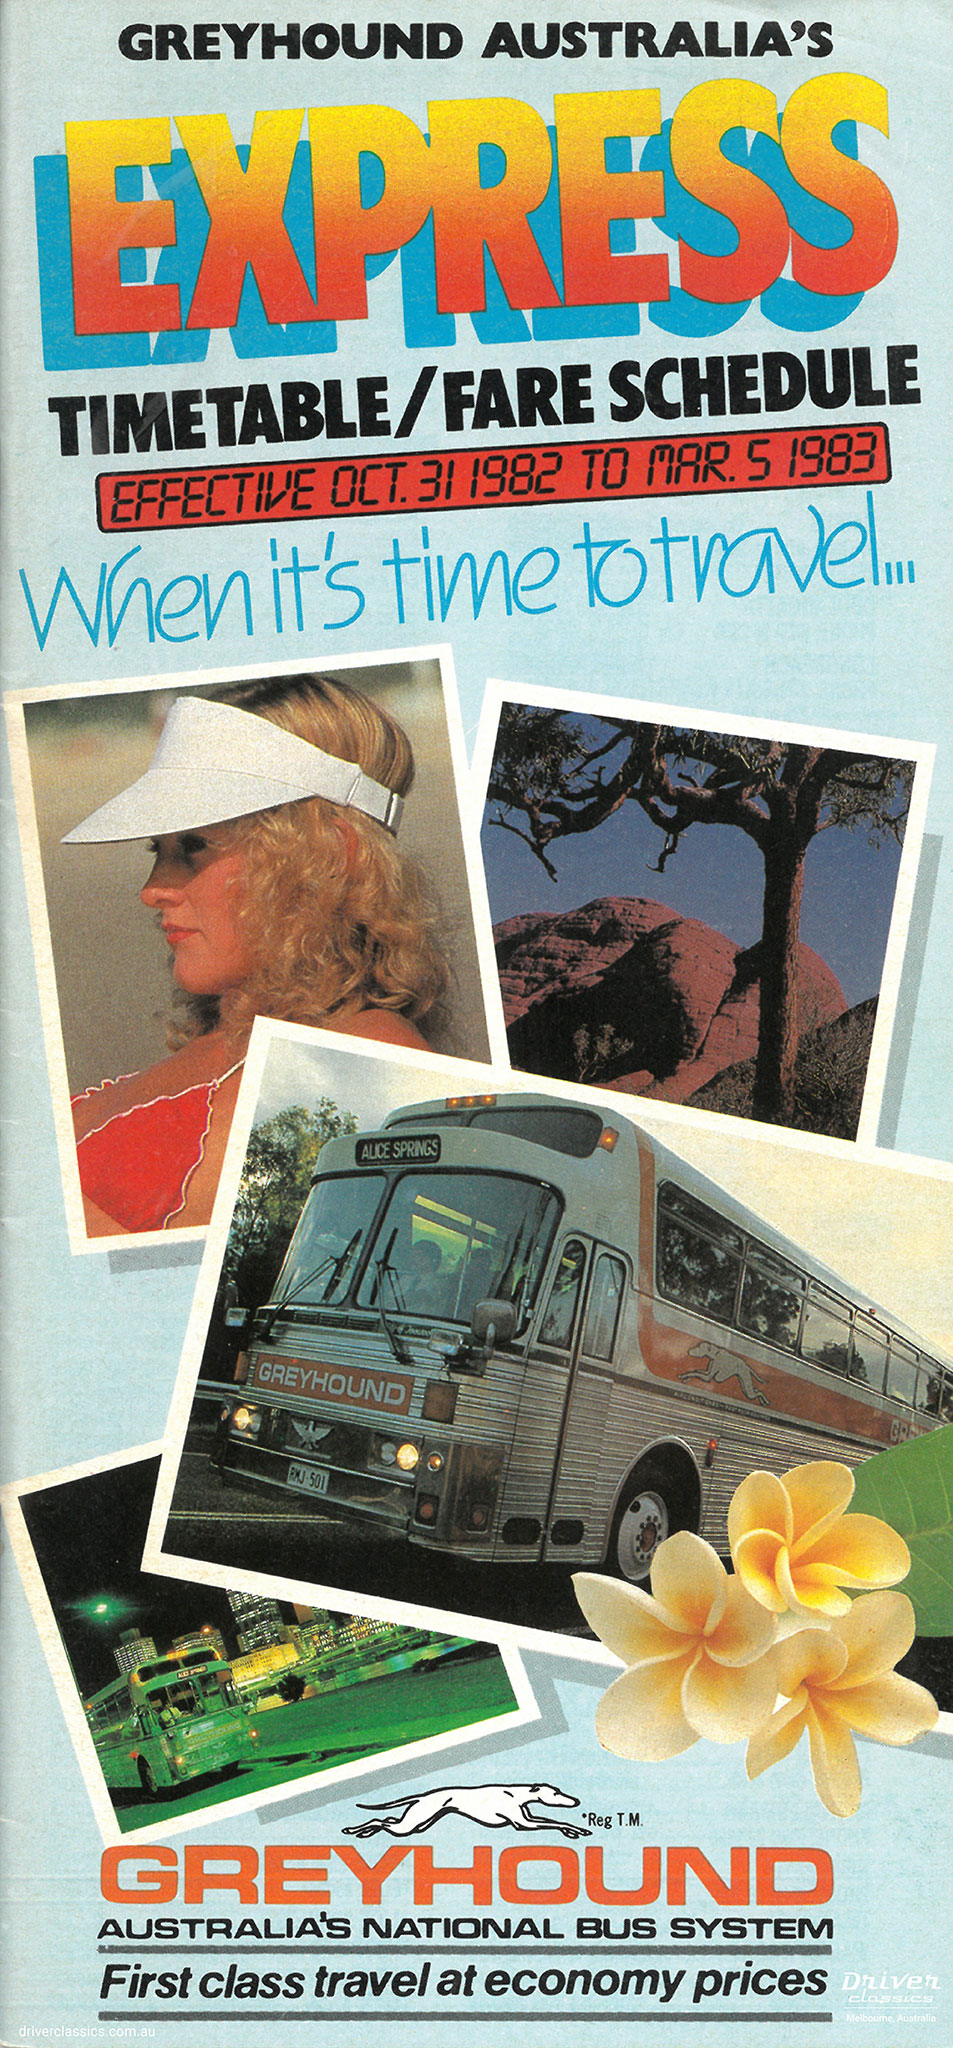 Greyhound (Greyhound Australia) express bus timetable from 1982, featuring Eagle Model 05 bus.